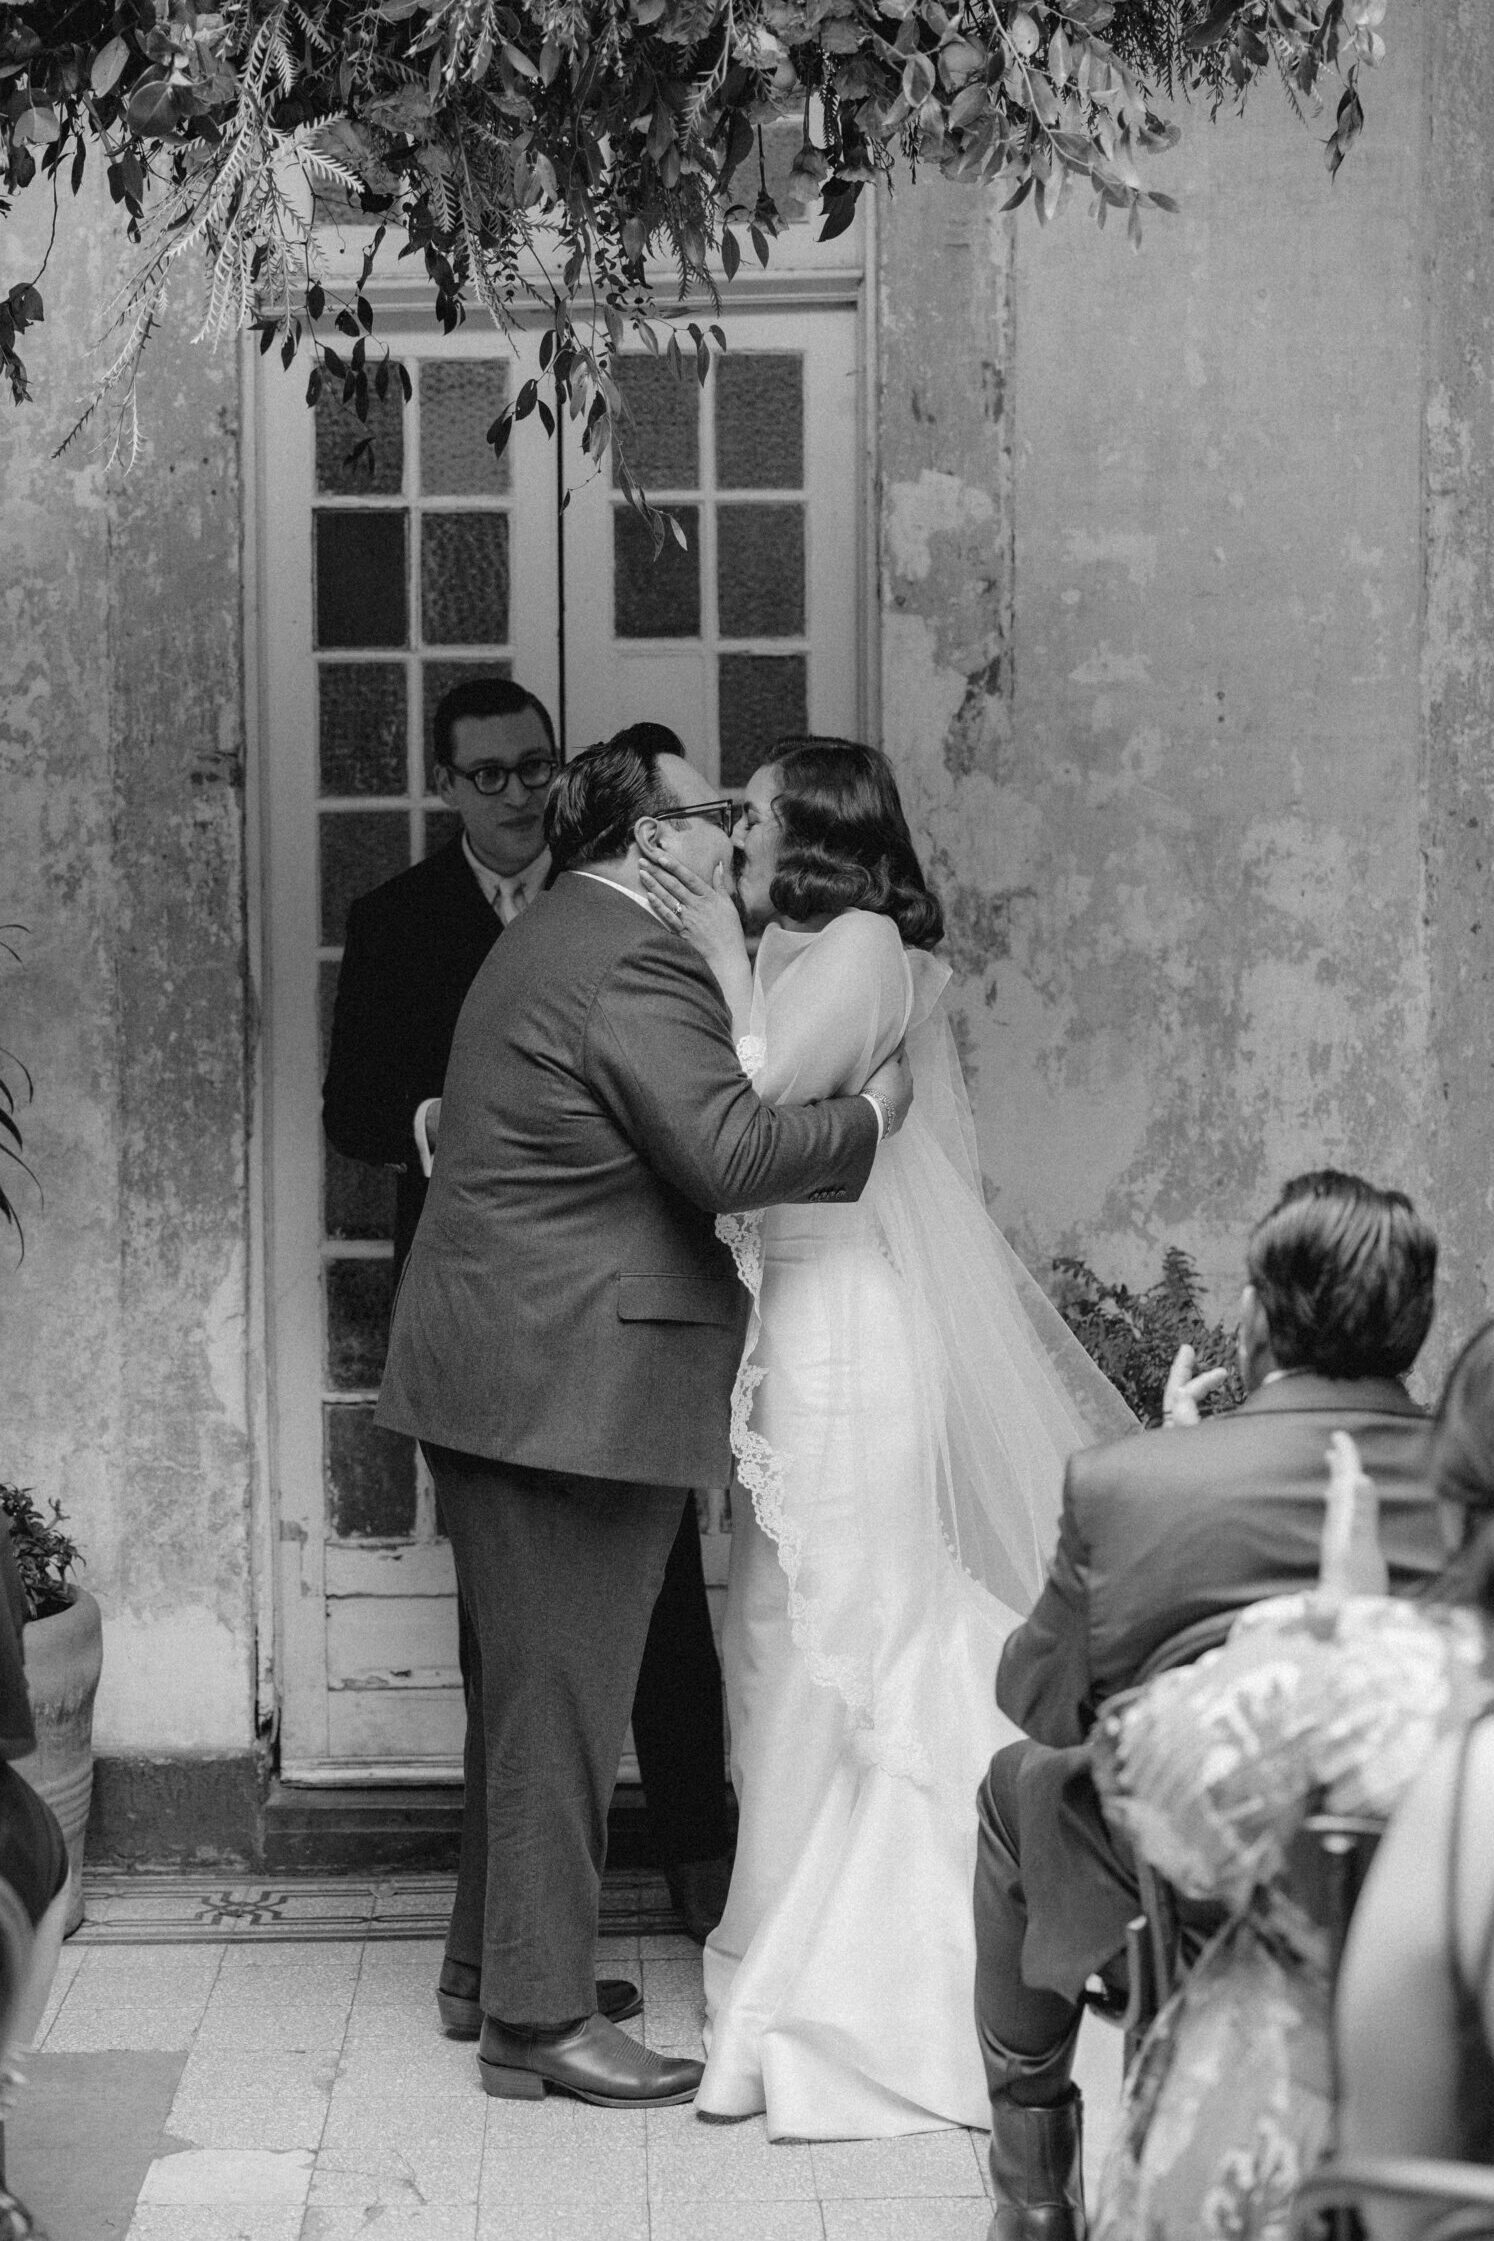 The bride and groom share their first kiss as husband and wife!